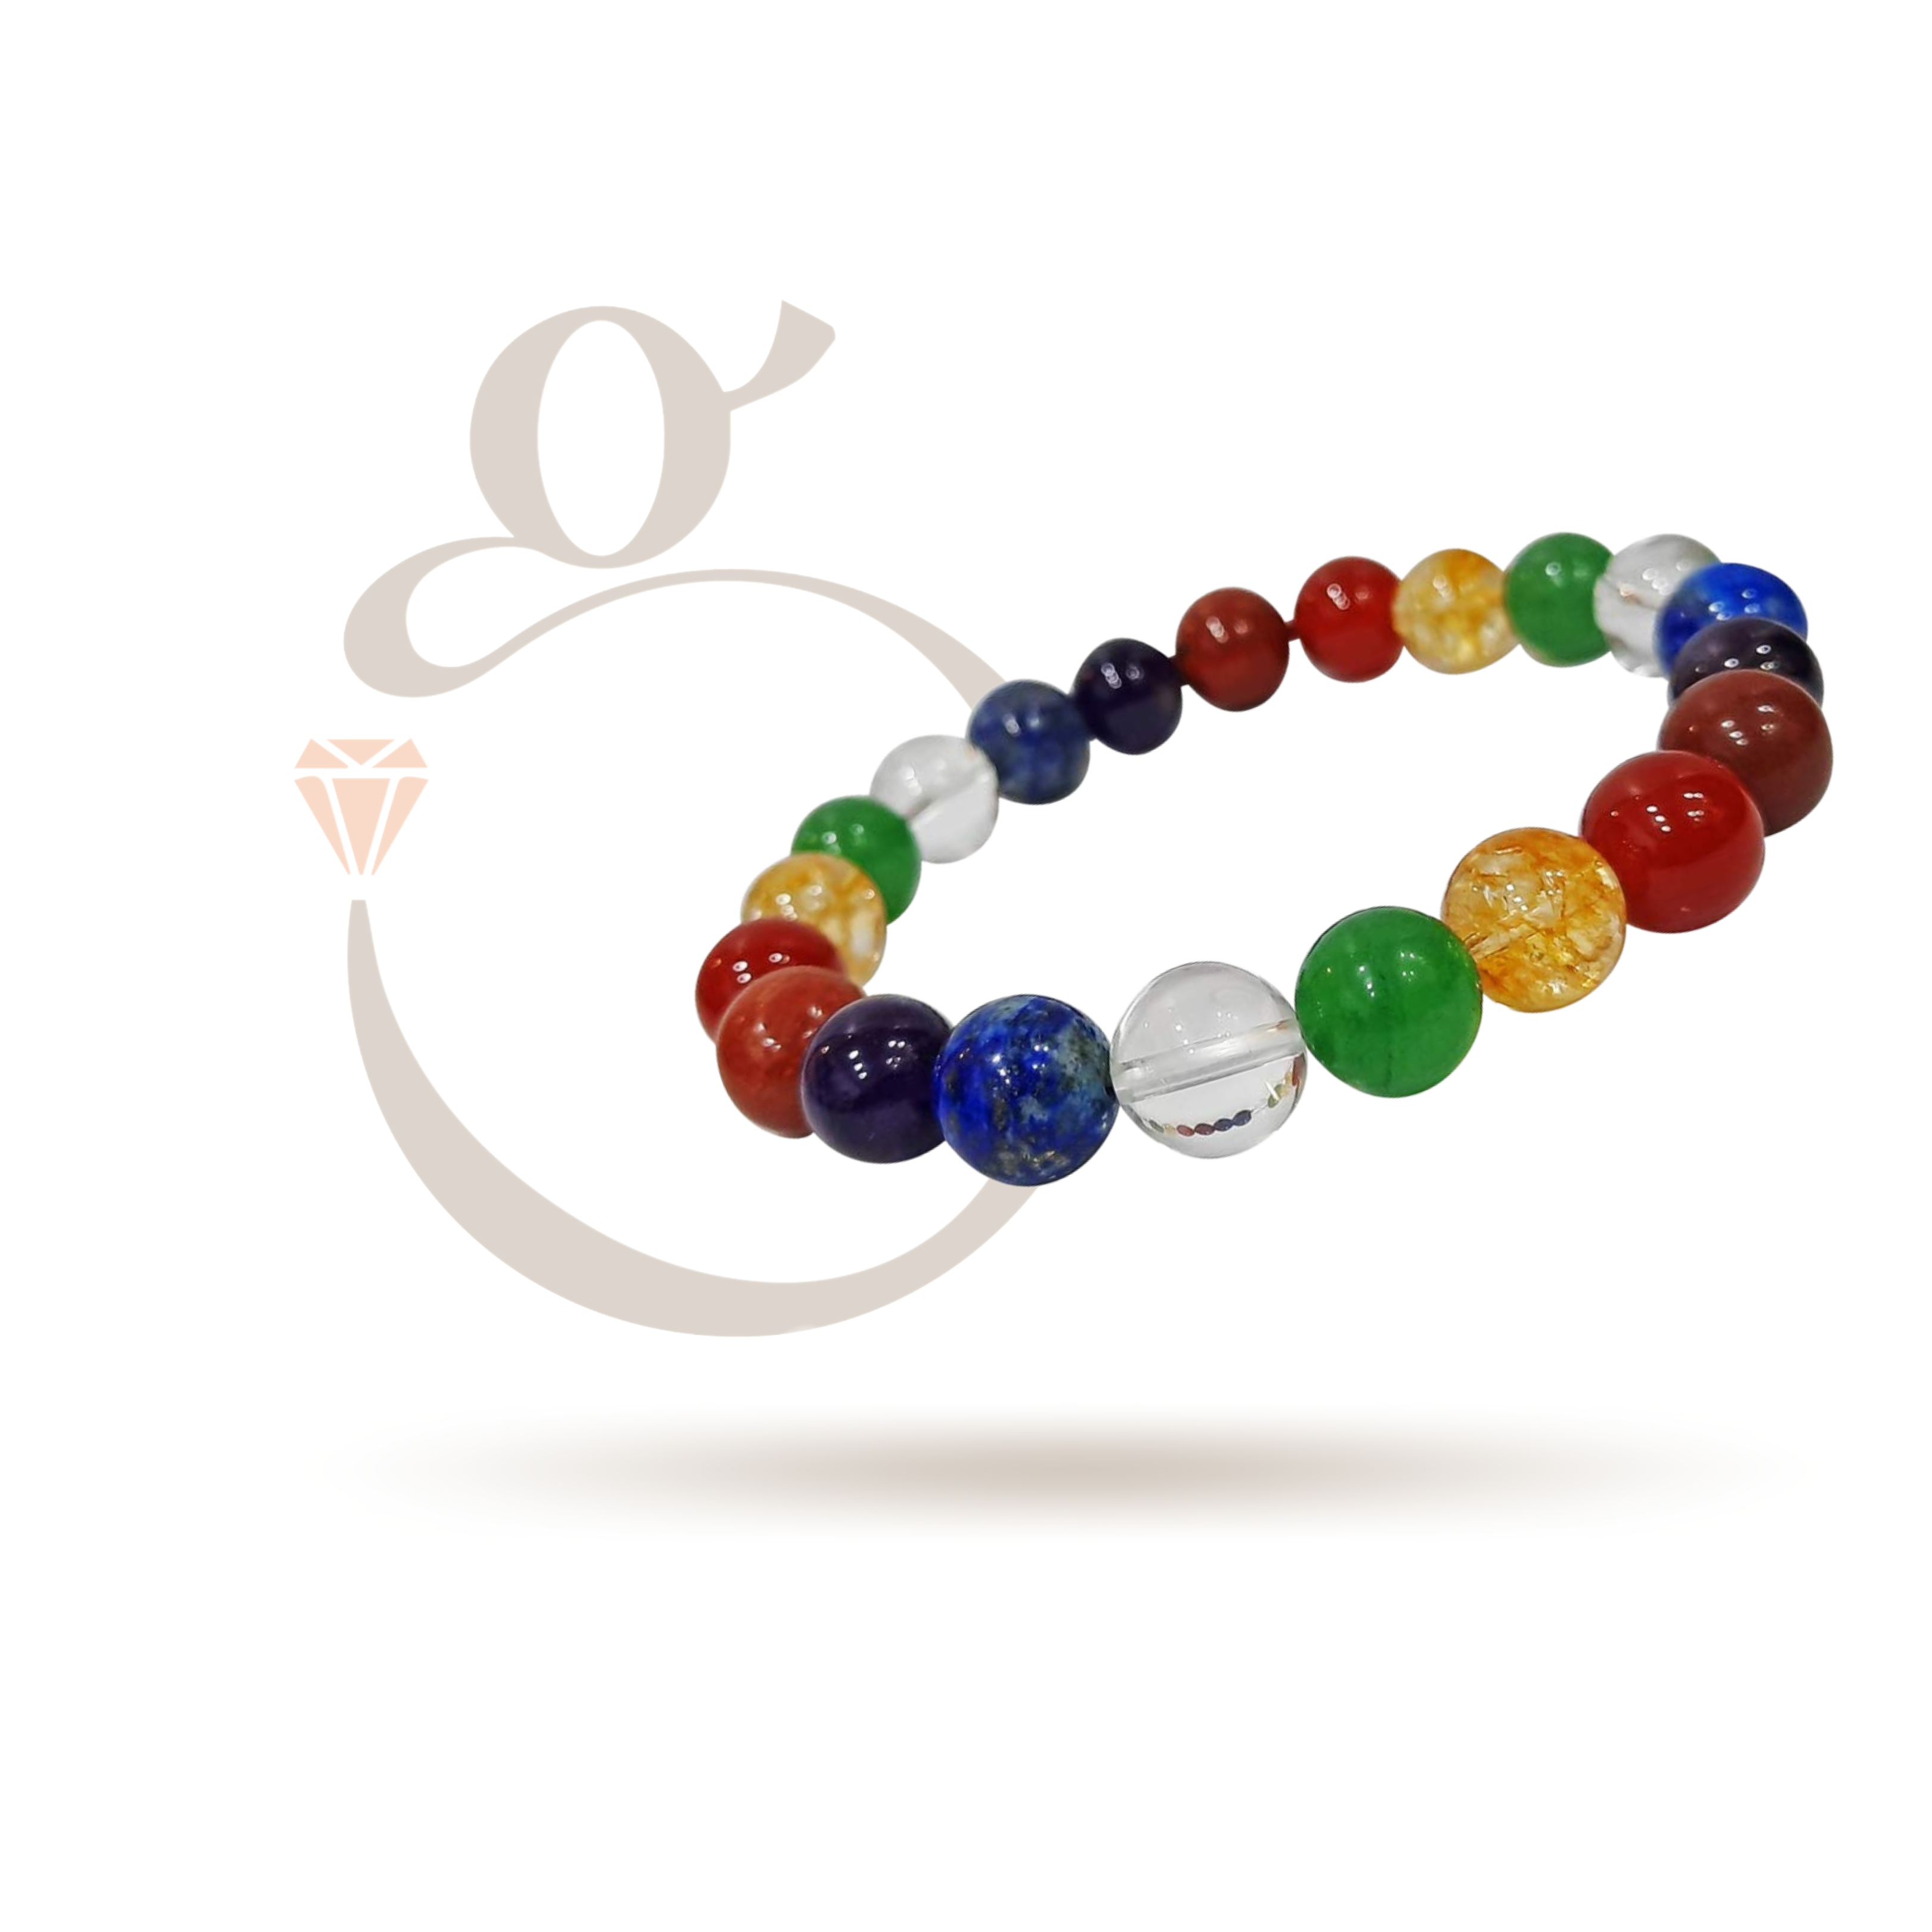 Buy Sukhad Original 7 Chakra Bracelet for Woman and Men with Lab  Certificate - Natural Energised Seven Lava Stone Money, Health, Protection,  Vastu, and Healing - 8MM Beads at Amazon.in